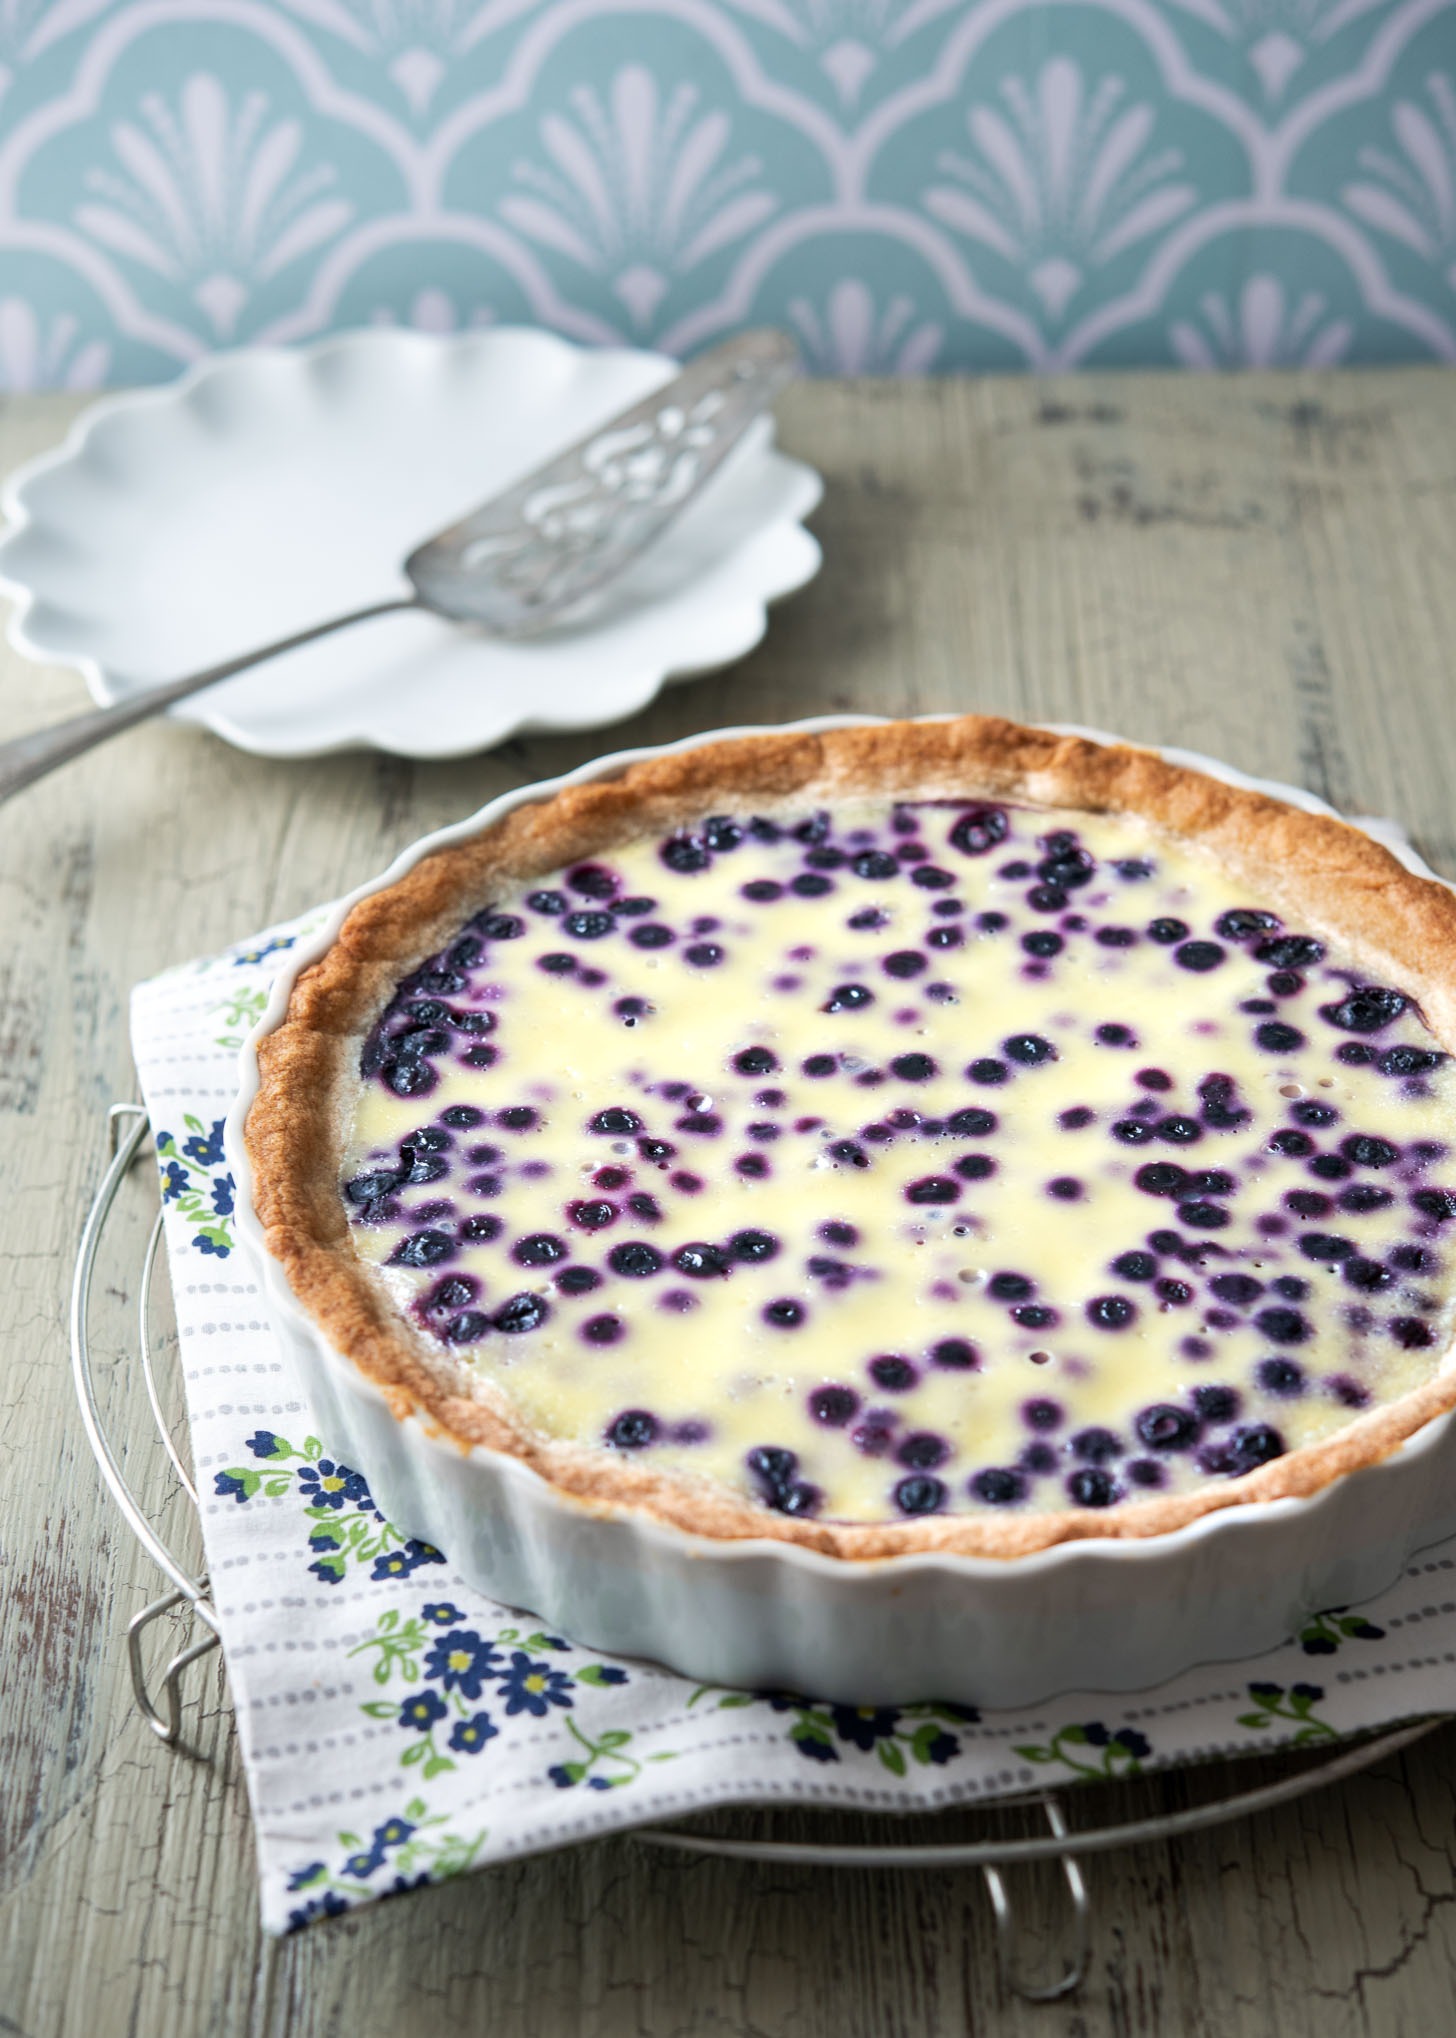 Finnish blueberry pie is baked in a fluted pie dish.